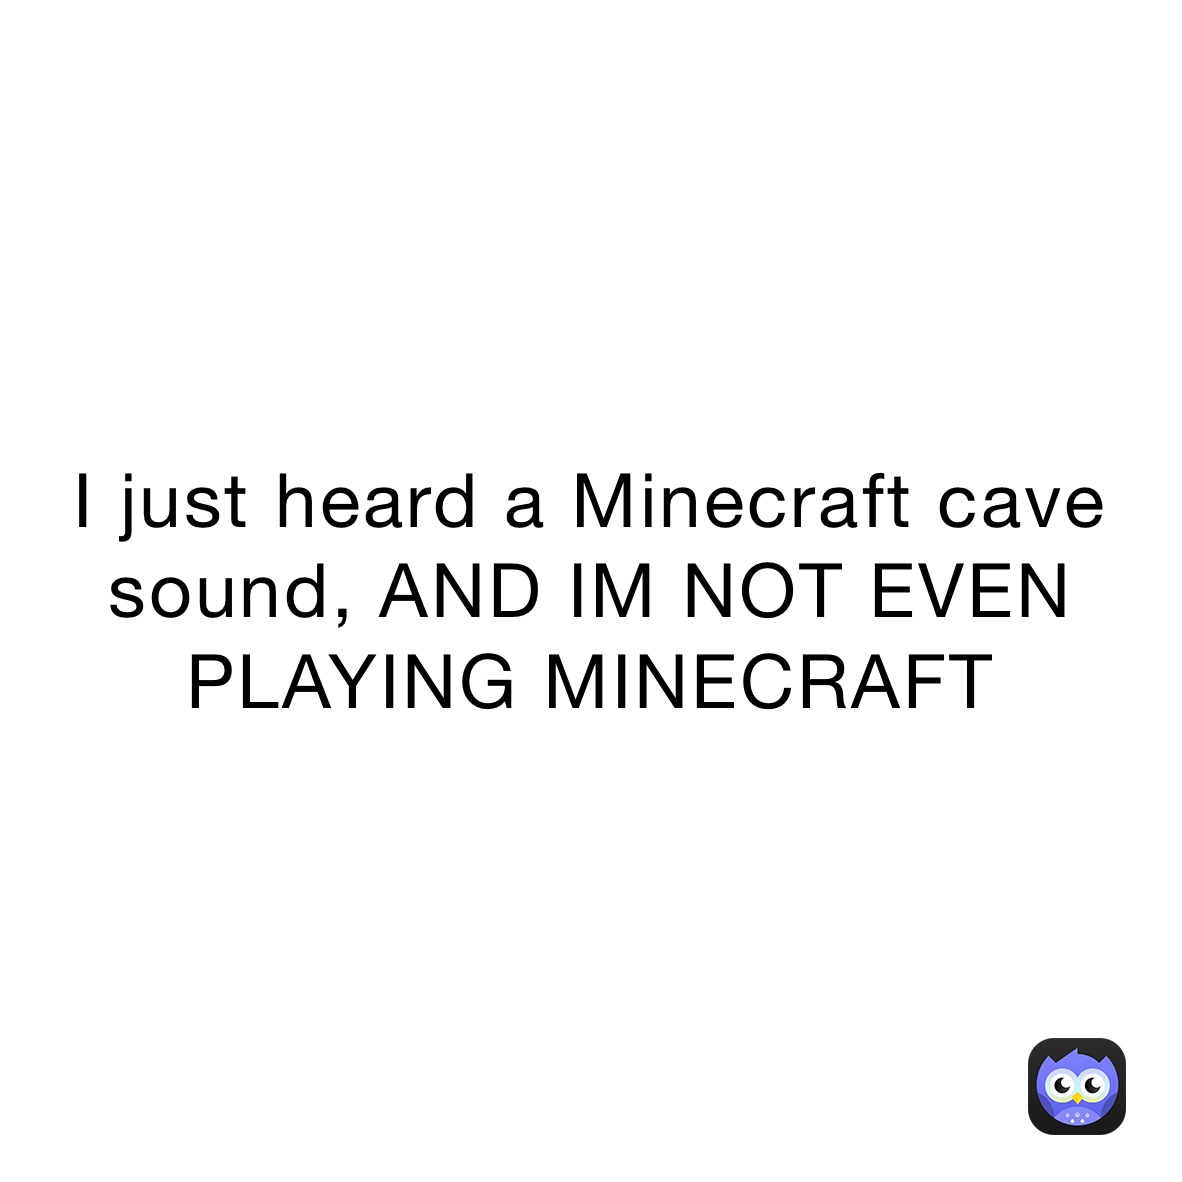 I just heard a Minecraft cave sound, AND IM NOT EVEN PLAYING MINECRAFT